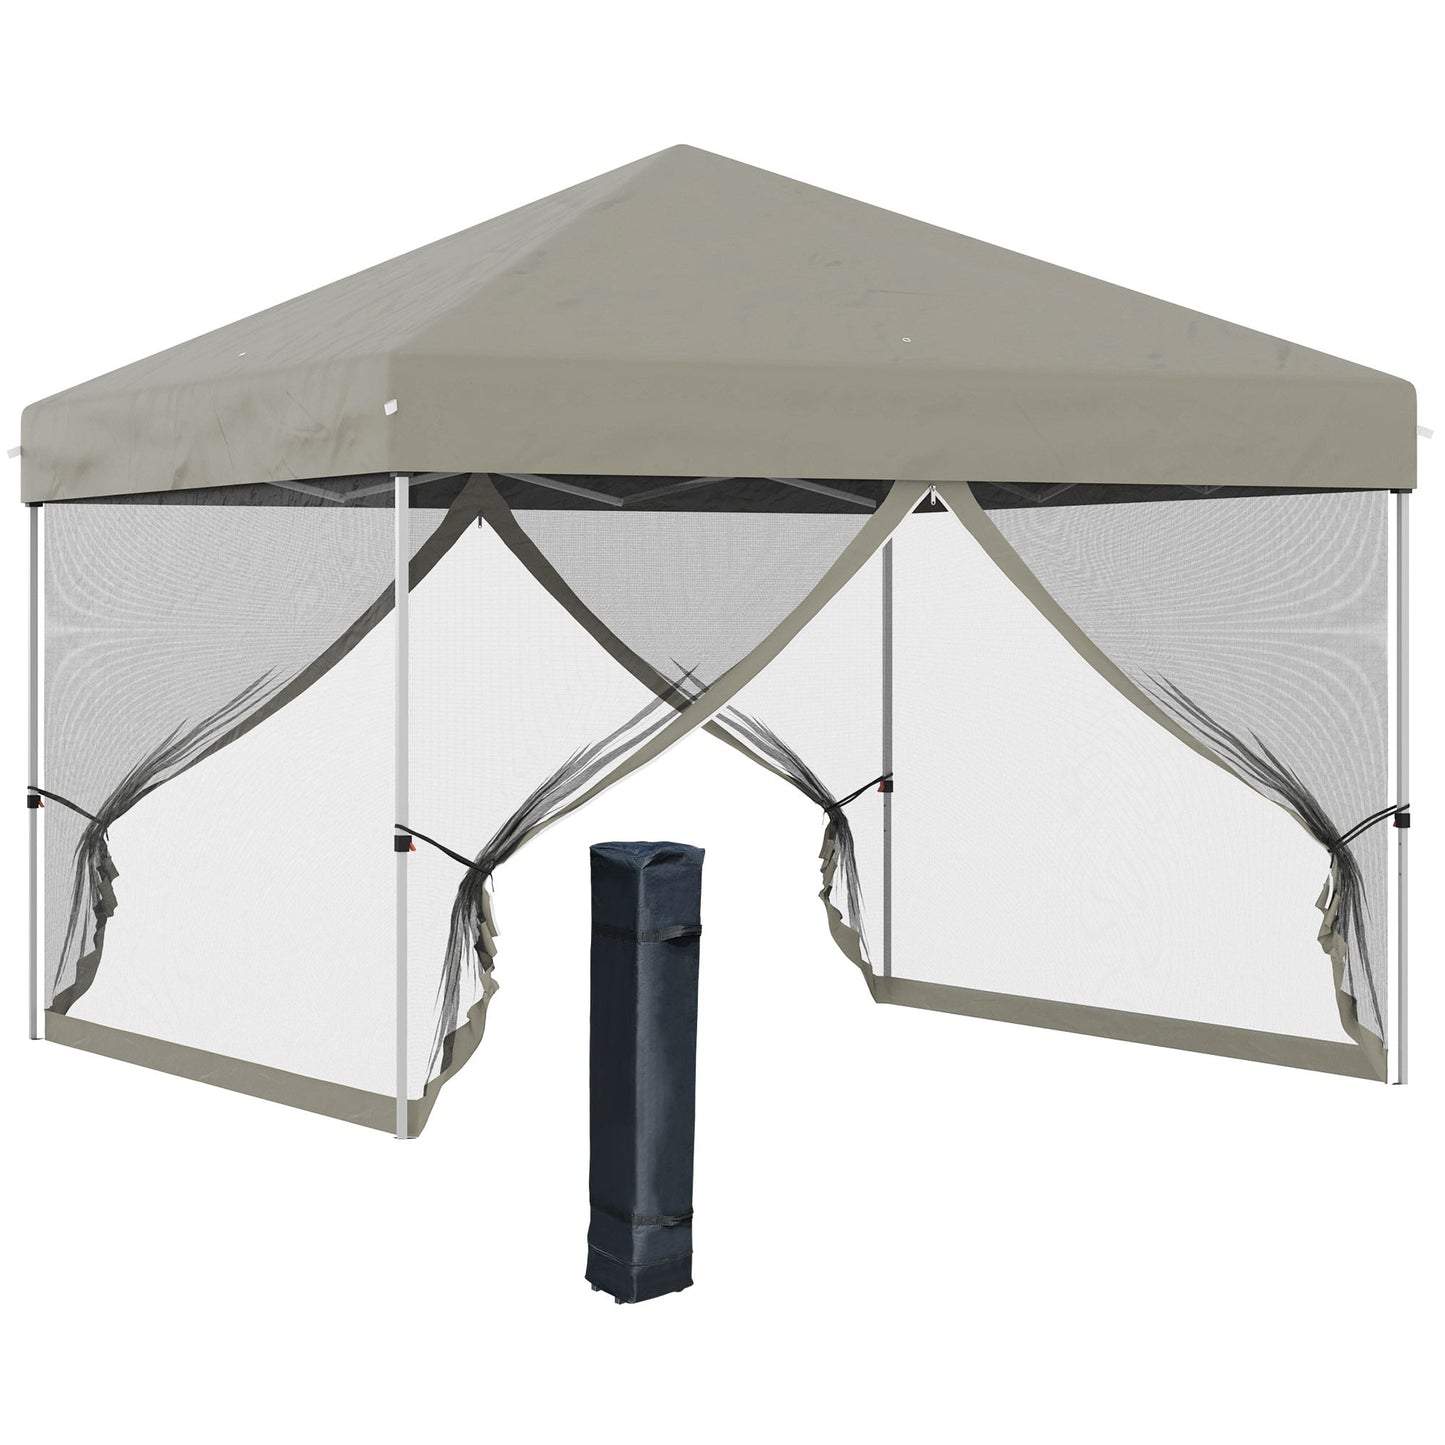 Miscellaneous-10' x 10' Pop Up Canopy Tent, Tents for Parties with Netting and Wheeled Carry Bag, Height Adjustable, sidewalls - Outdoor Style Company